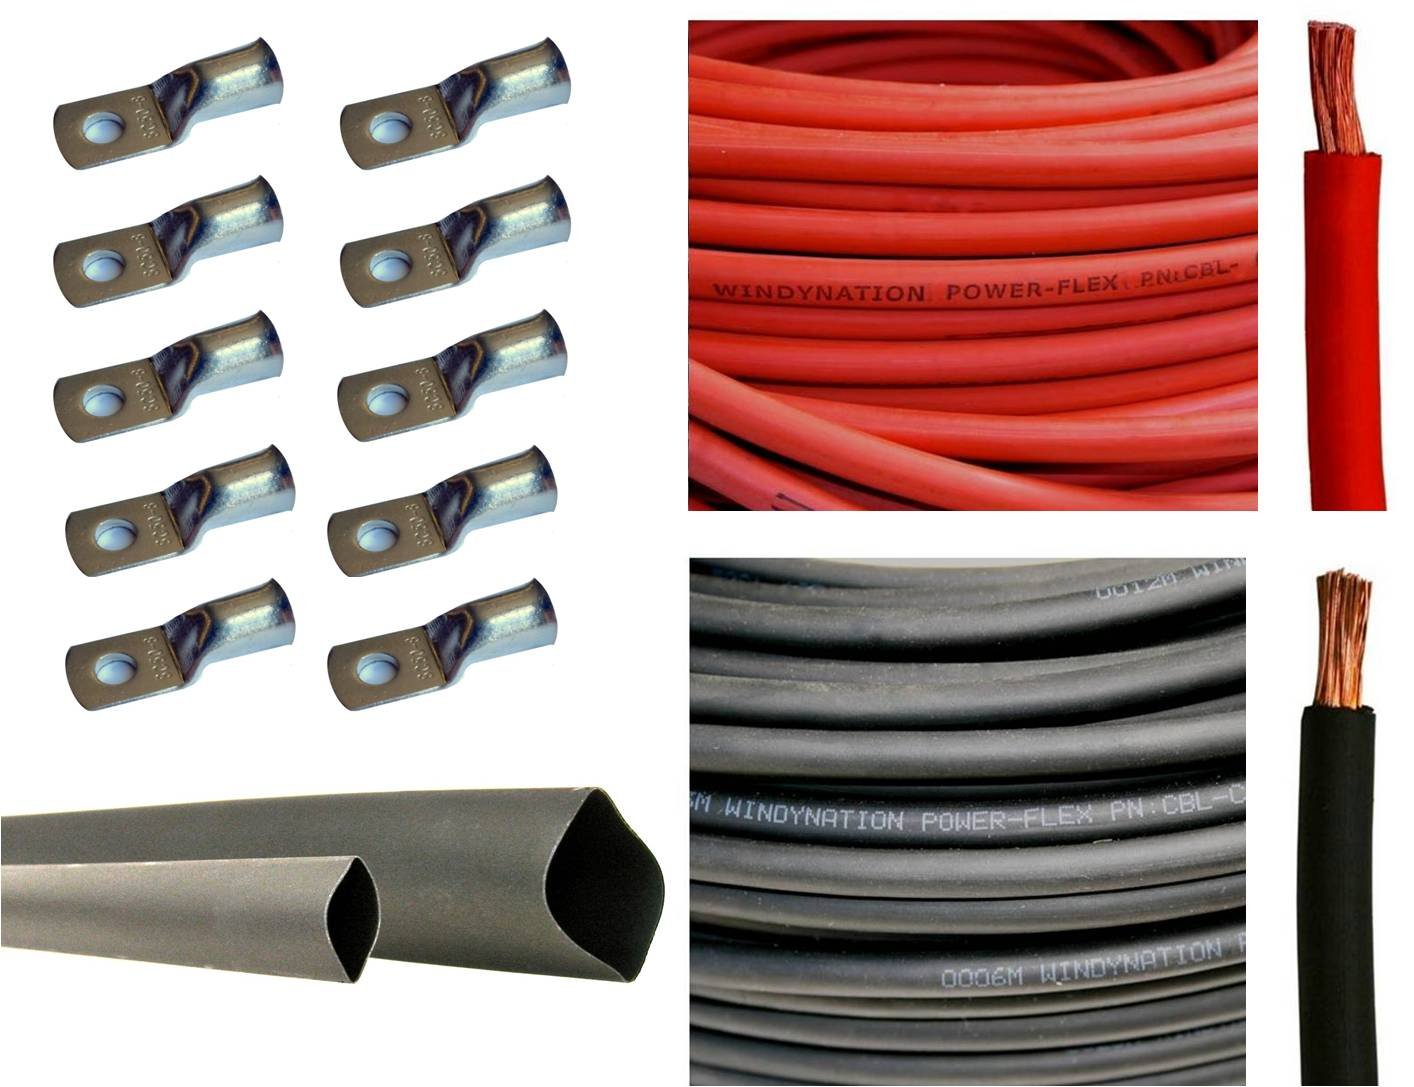 WindyNation Wni 40 Awg 40 Gauge 25 Feet Black  25 Feet Red Battery Welding Pure Copper Ultra Flexible Cable  5Pcs Of 516  5Pcs 38 Copper Cab